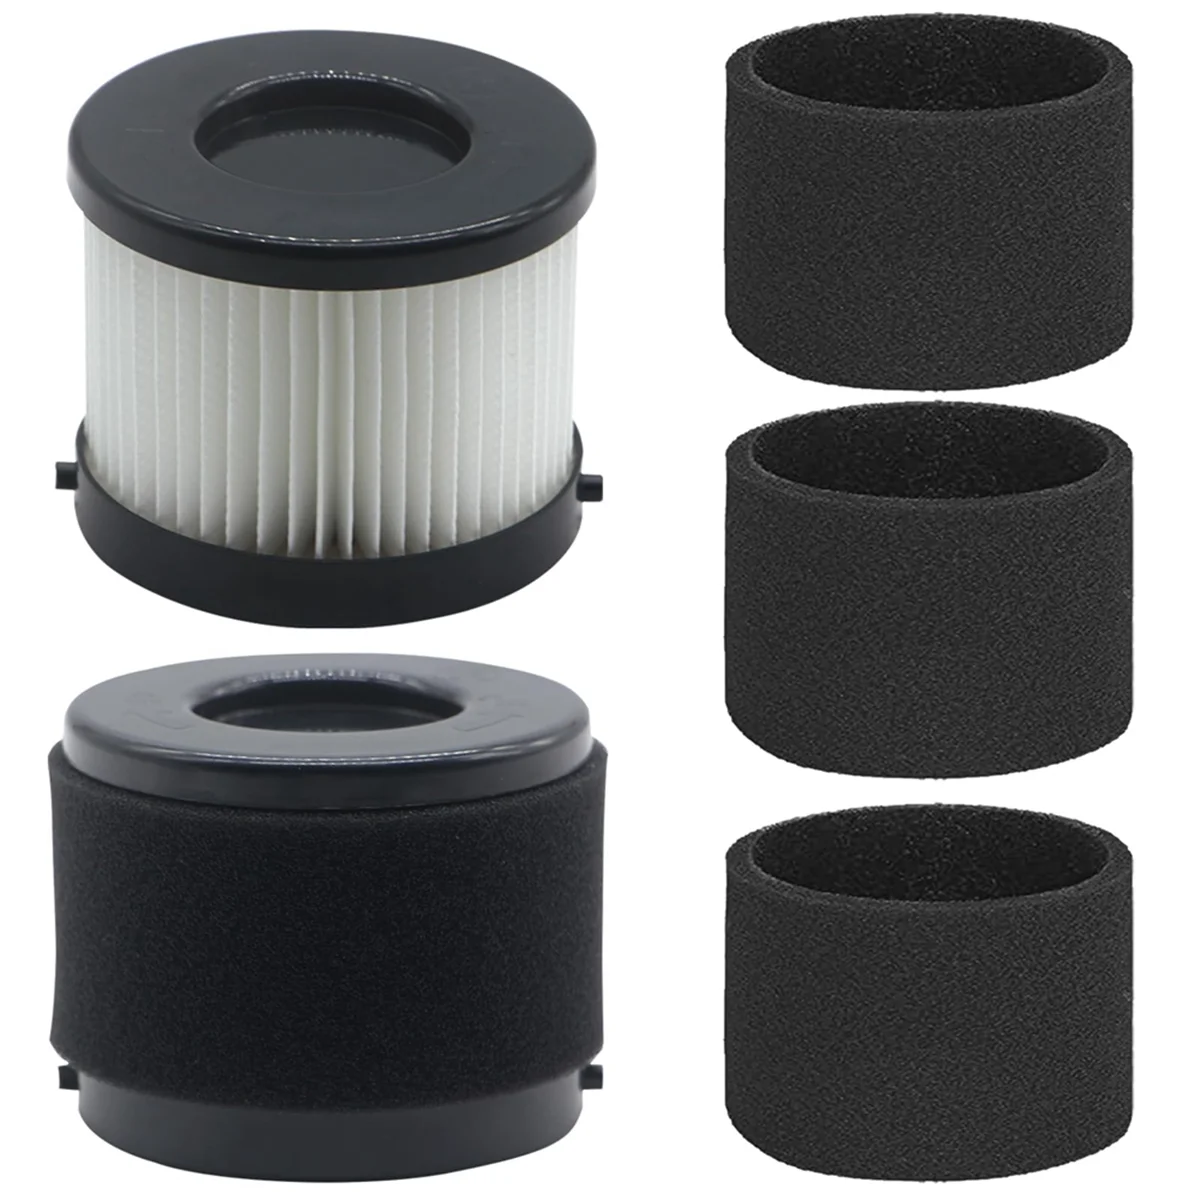 

49-90-0160, 49-90-1951 Filters for Milwaukee Compact Vacuum 0882-20 M18, 2 Pack HEPA Filters and 4 Pack Foam Filters